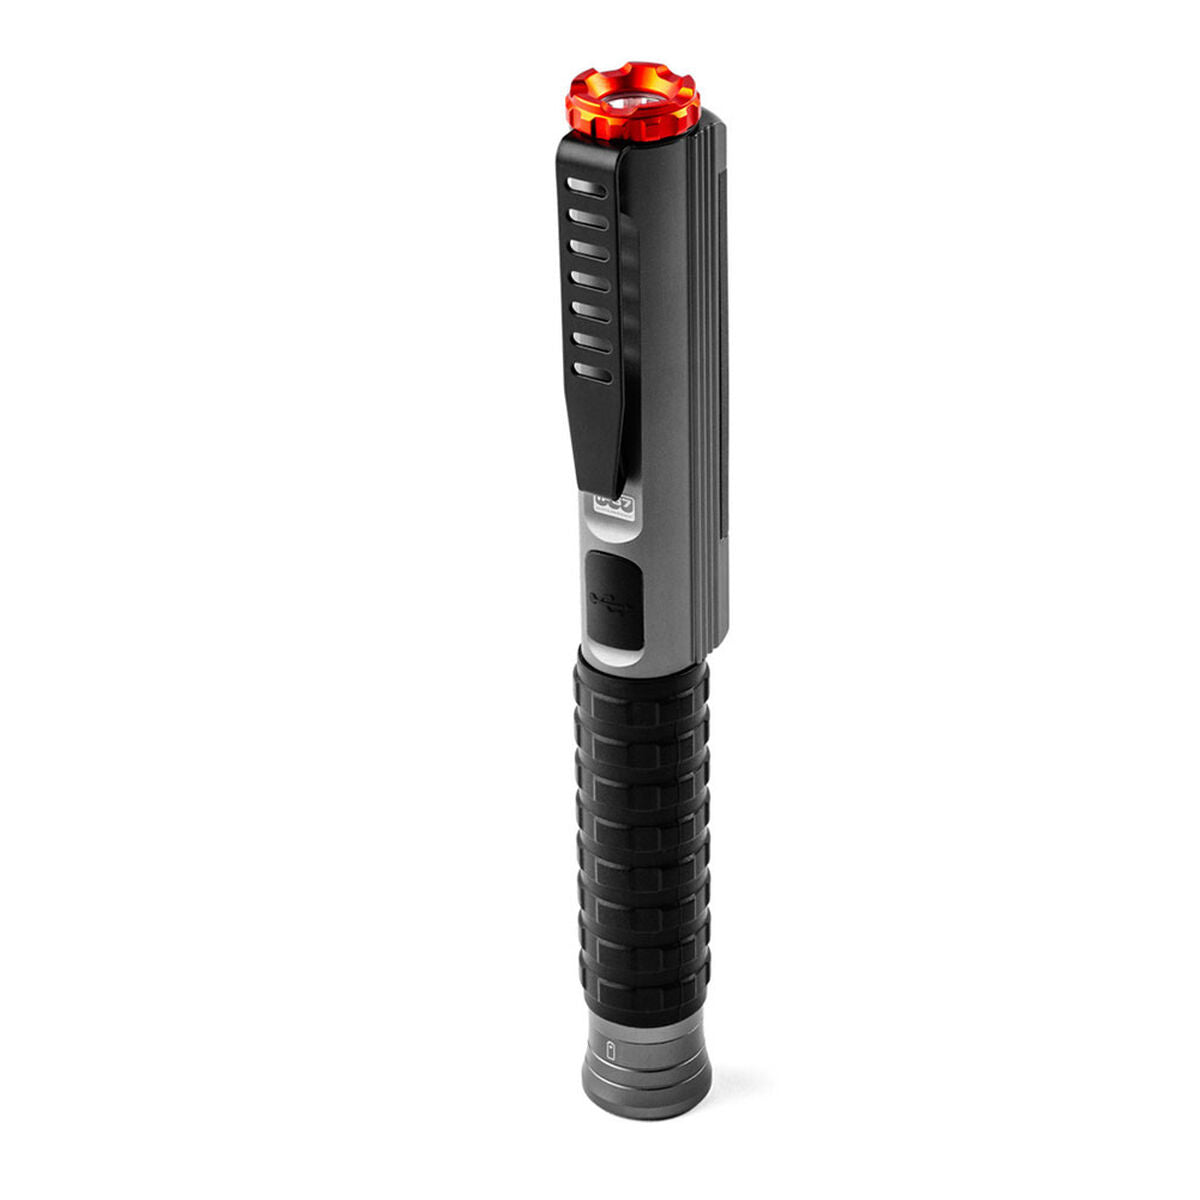 Rechargeable LED torch Nebo Big Larry Pro+ 600 lm